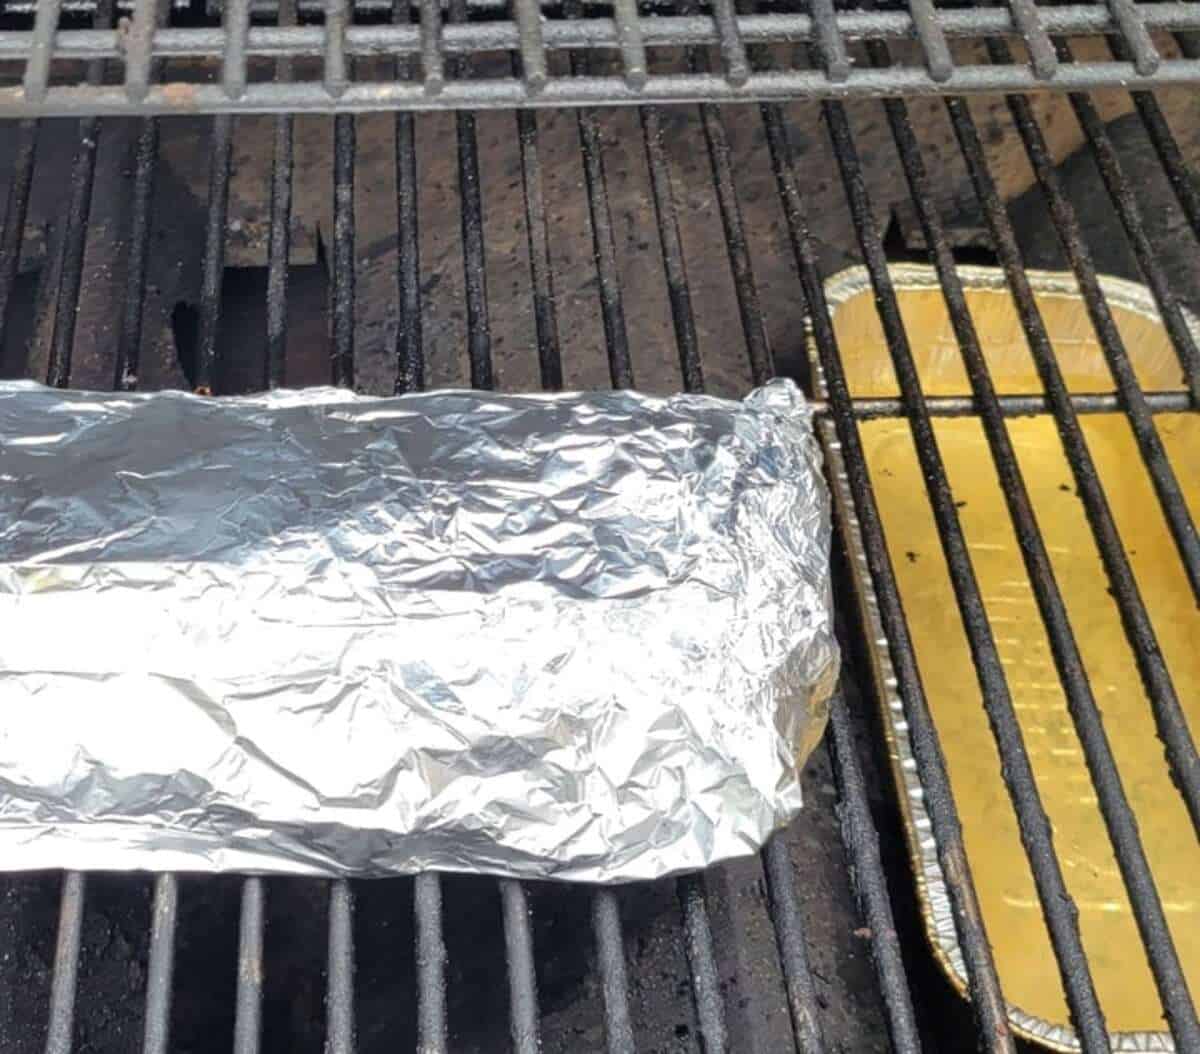 rack of ribs completely covered in foil on grill, foil water pan shown off to one side